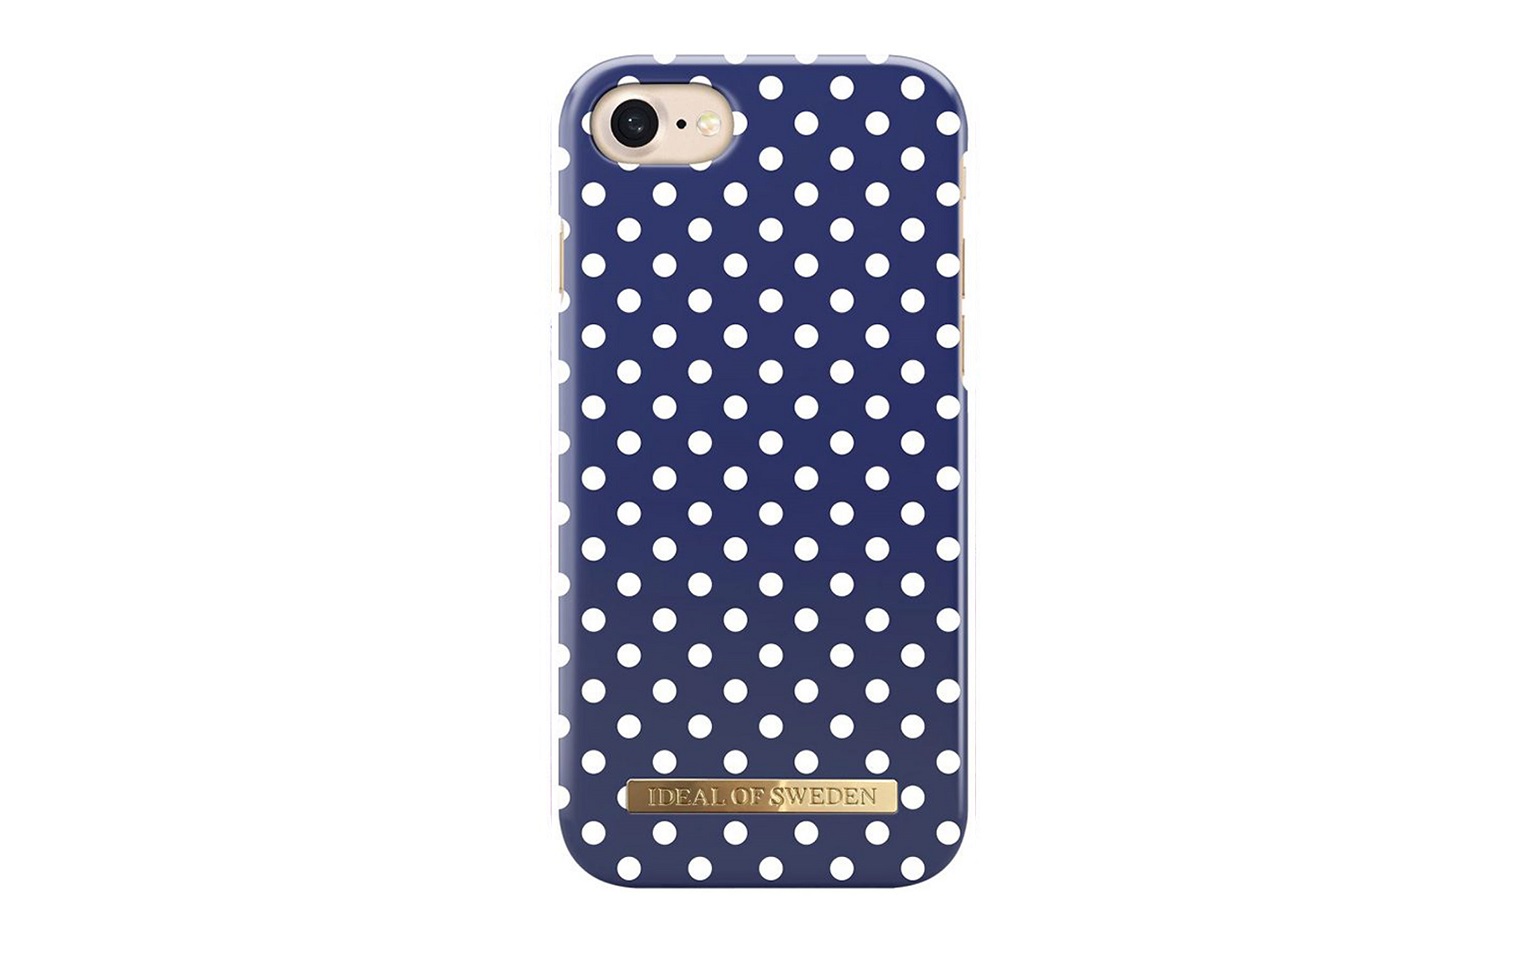 iDeal Fashion Case S/S17 Blue Polka Dots For iPhone 8/7